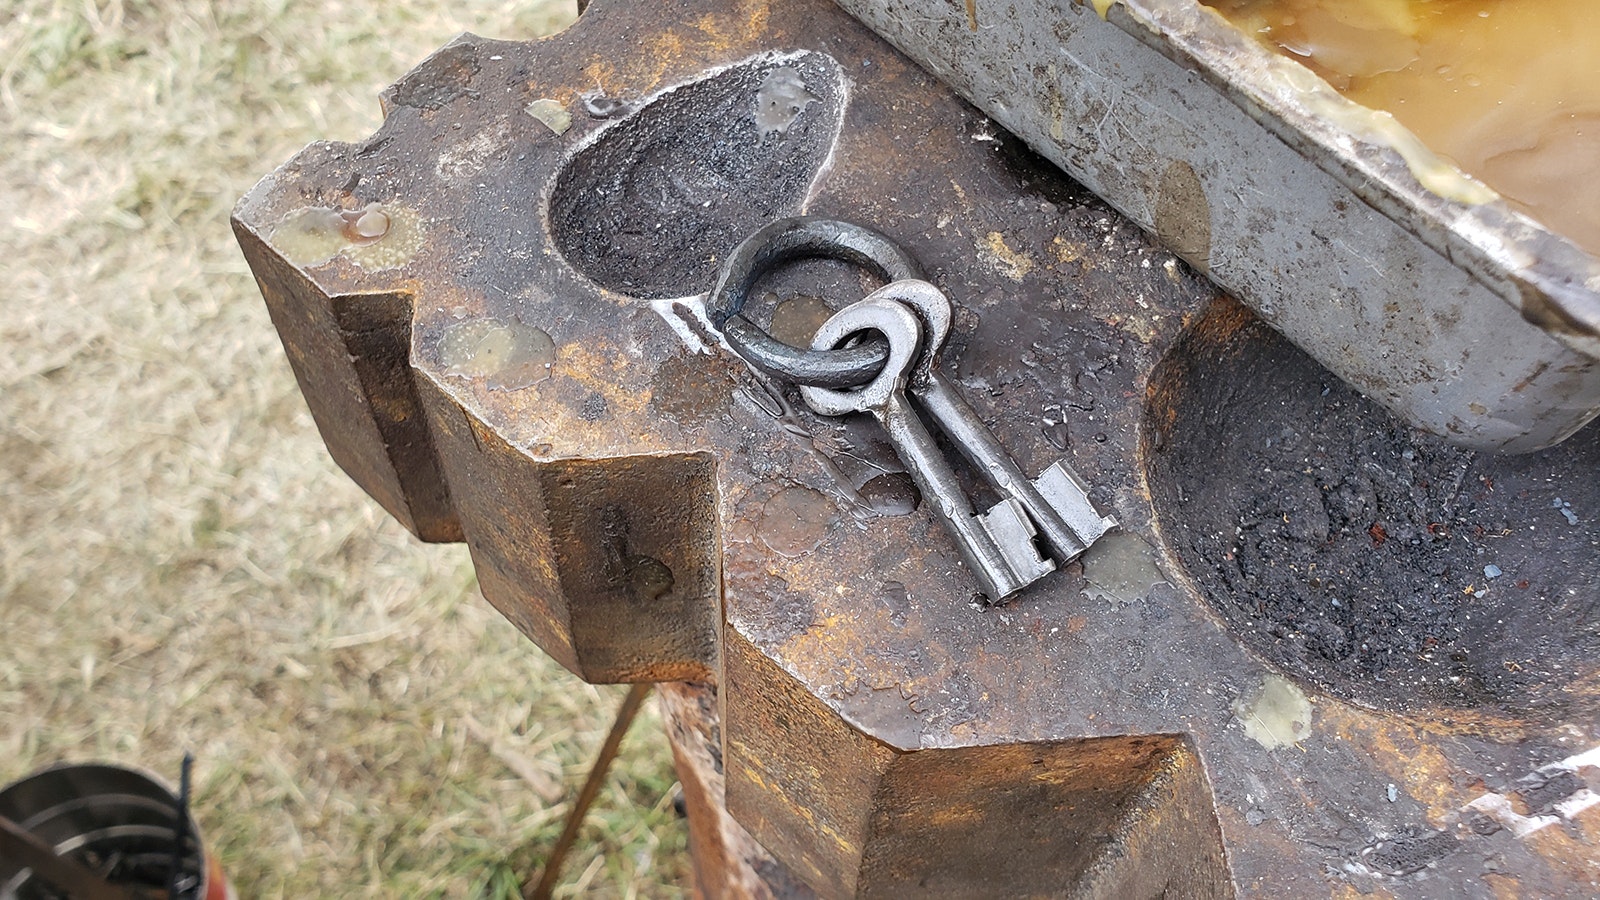 A pair of keys for an old padlock on a period correct key ring. The ring is no longer glowing, but still too hot to touch.